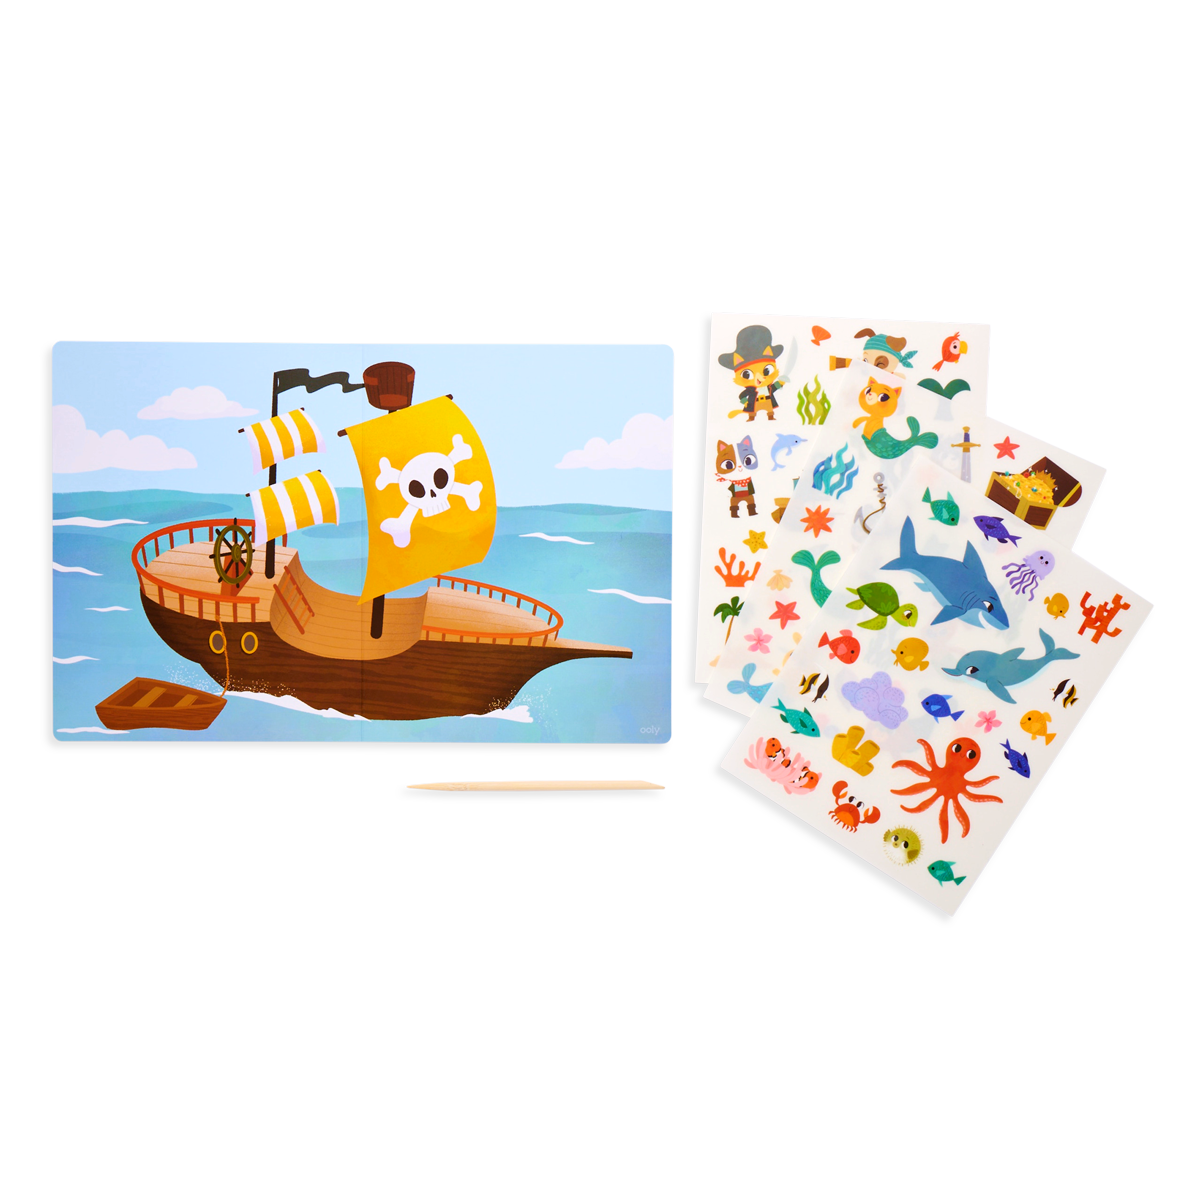 OOLY Set The Scene Transfer Stickers Magic - Ocean Adventure Stickers